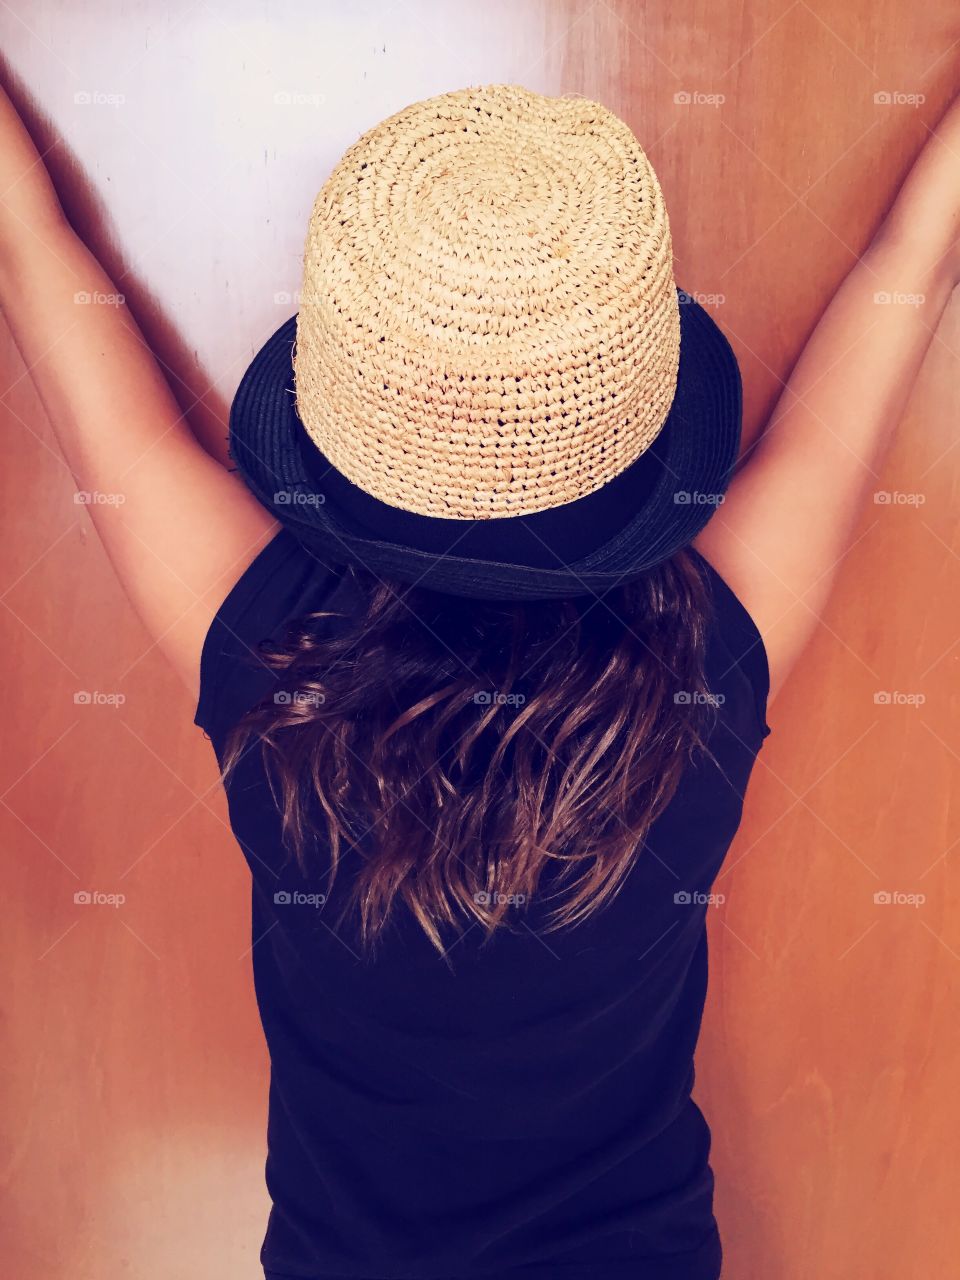 Rear view of young girl in blue shirt and hat